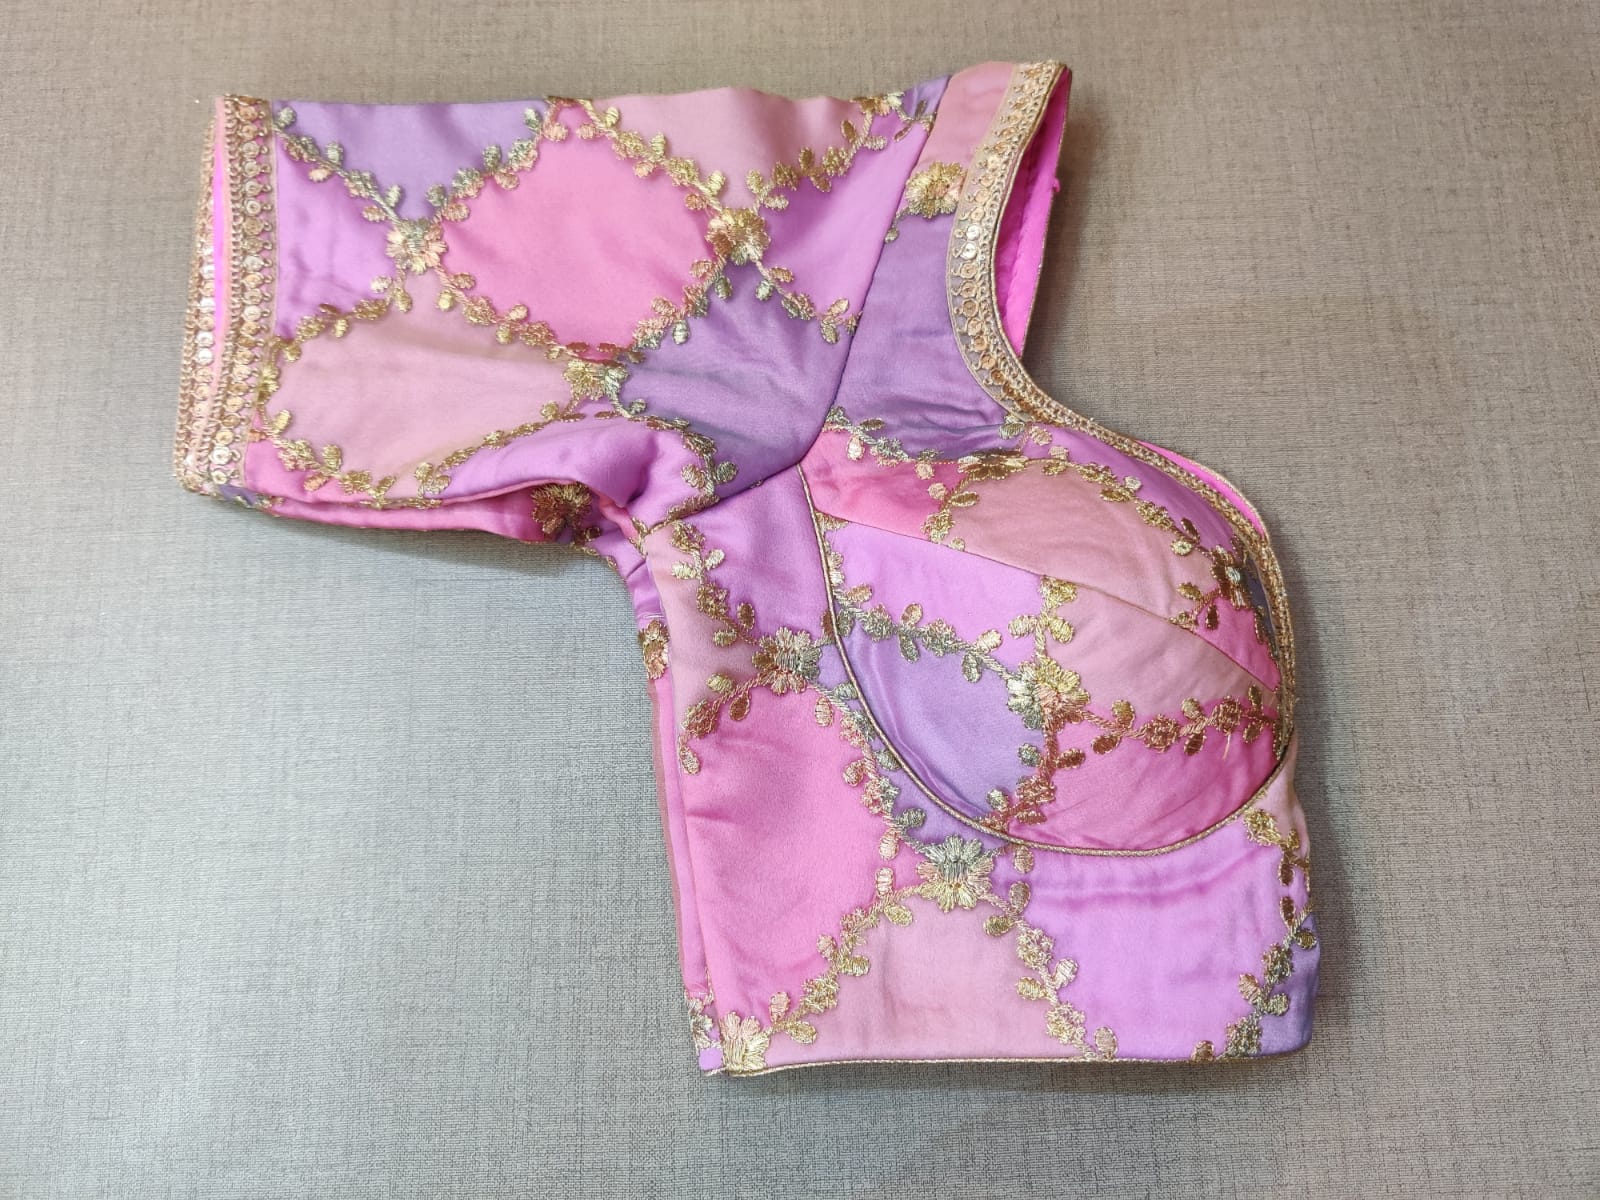 Buy beautiful light pink and lavender embroidered sari blouse online in USA. Elevate your Indian ethnic saree looks with beautiful readymade saree blouse, embroidered saree blouses, Banarasi saree blouse, designer sari blouses, sleeveless saree blouses from Pure Elegance Indian fashion store in USA.-sleeves